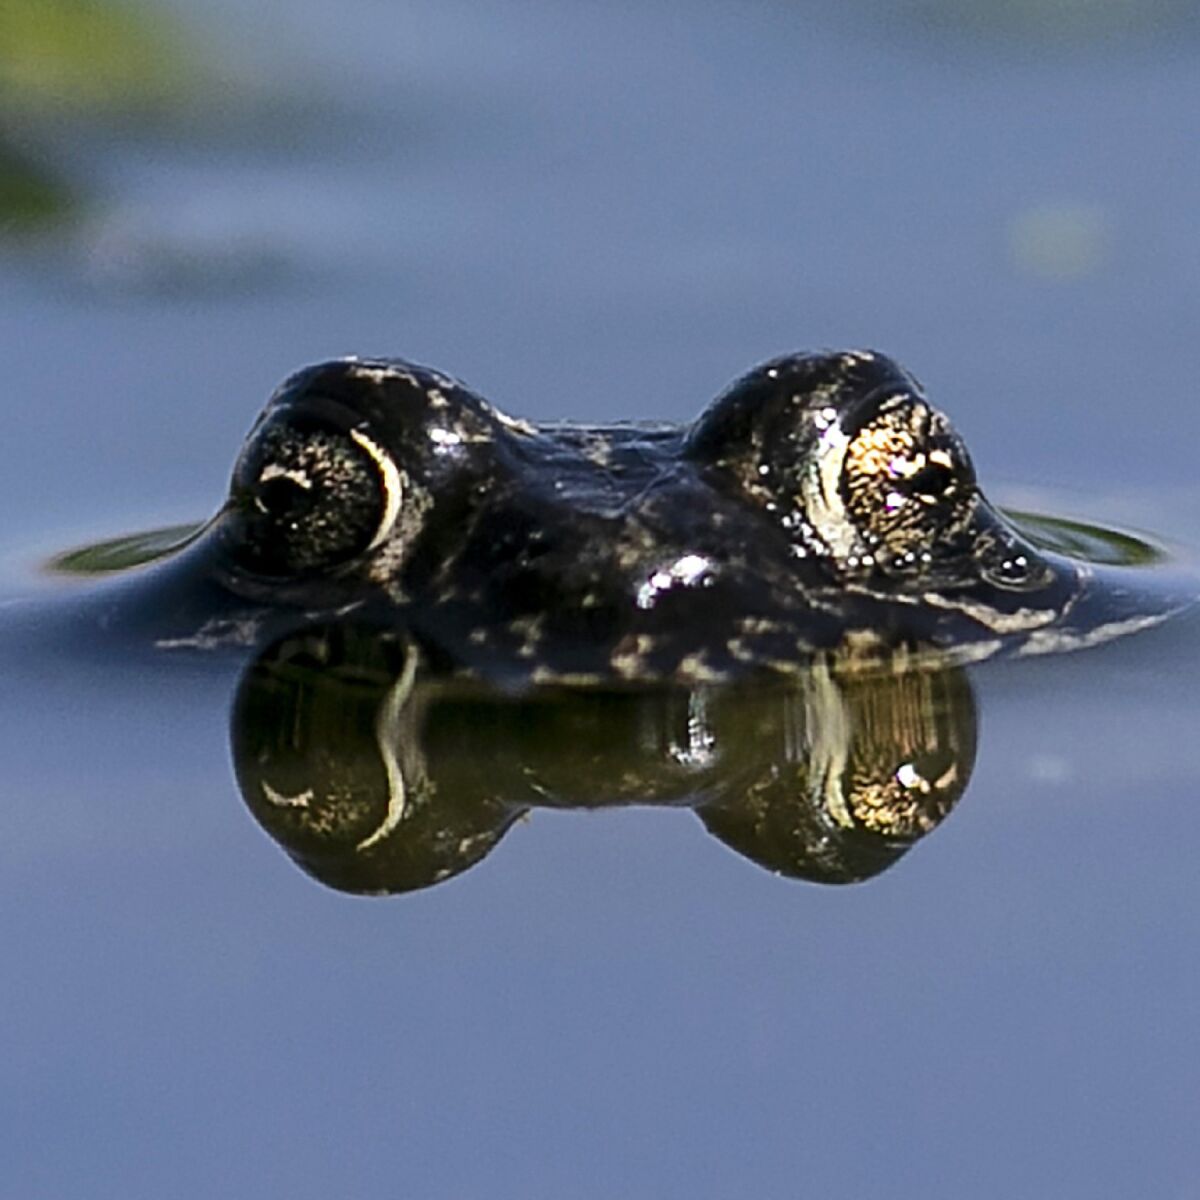 The eyes of a black toad, partly submerged in water.